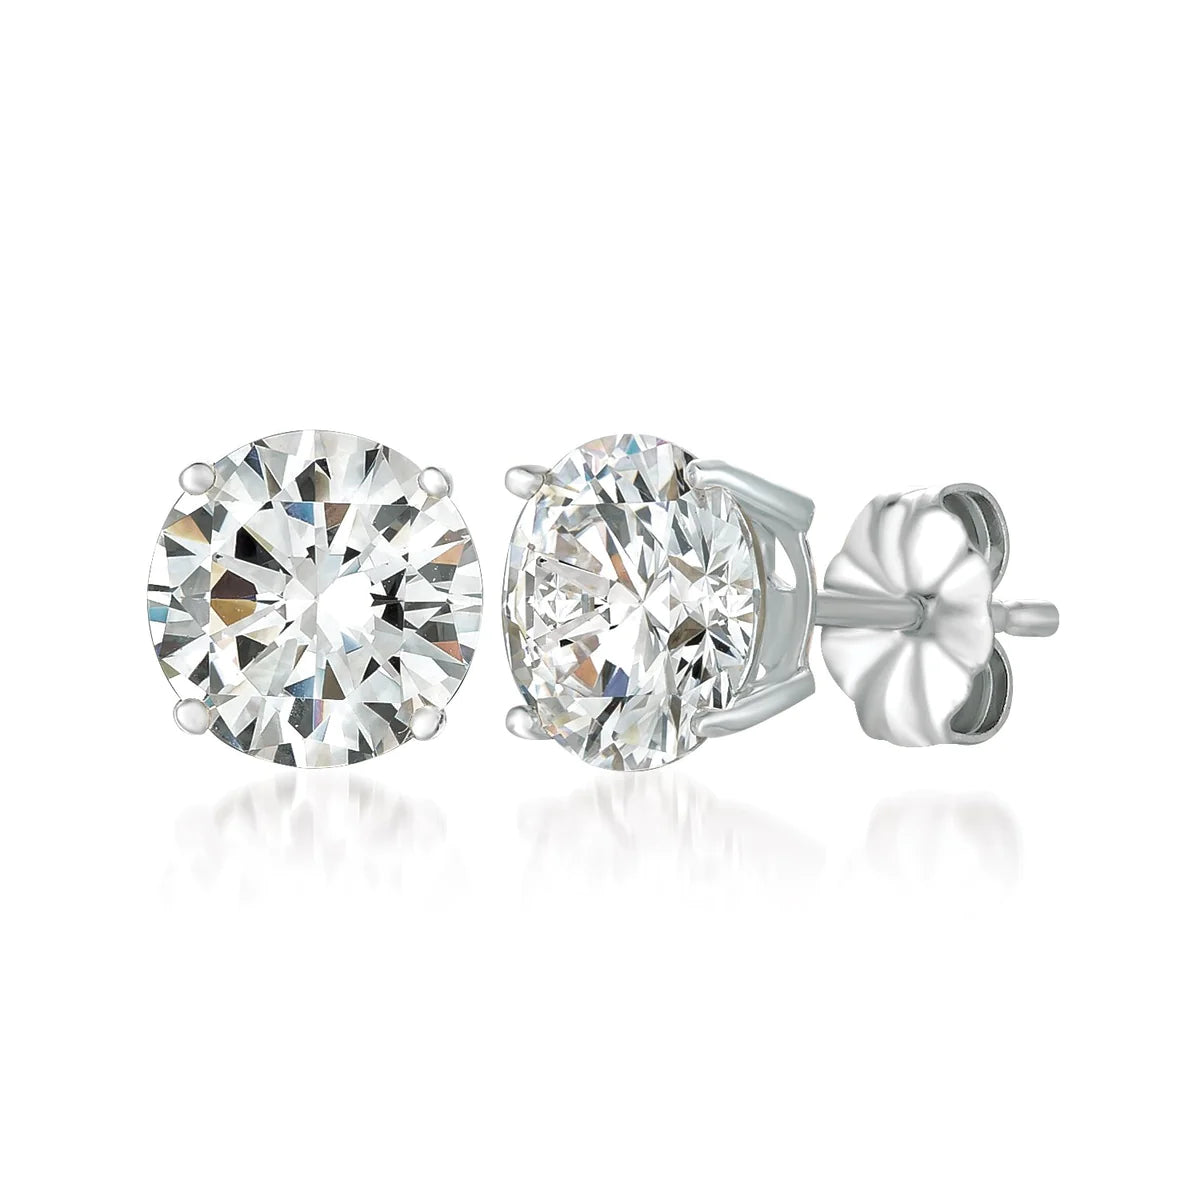 Solitaire Brilliant Stud Earrings Finished in Pure Platinum- 4.0 cttw